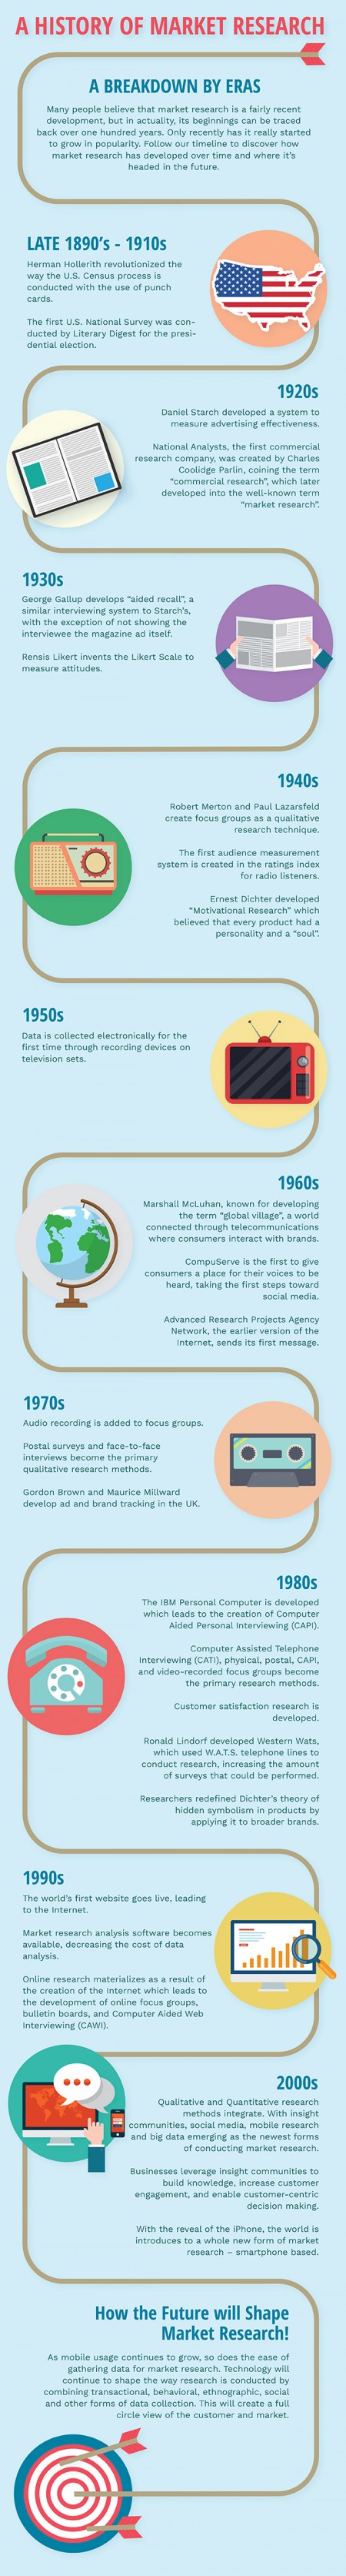 History of Infographic